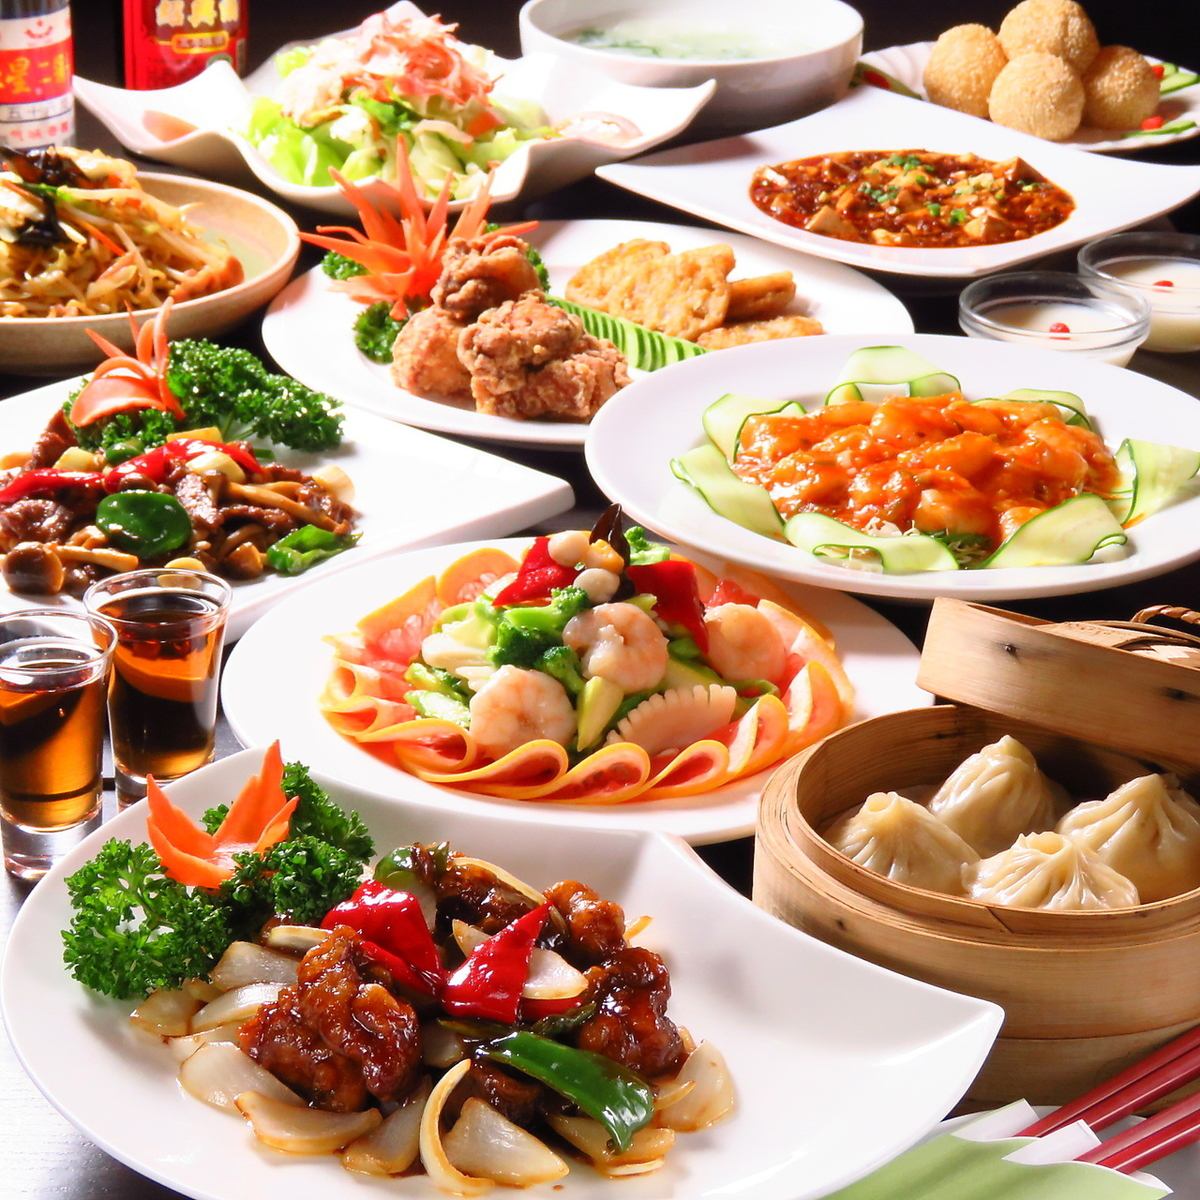 You can also enjoy luxury food courses such as shark fin and snow crab at a great price.